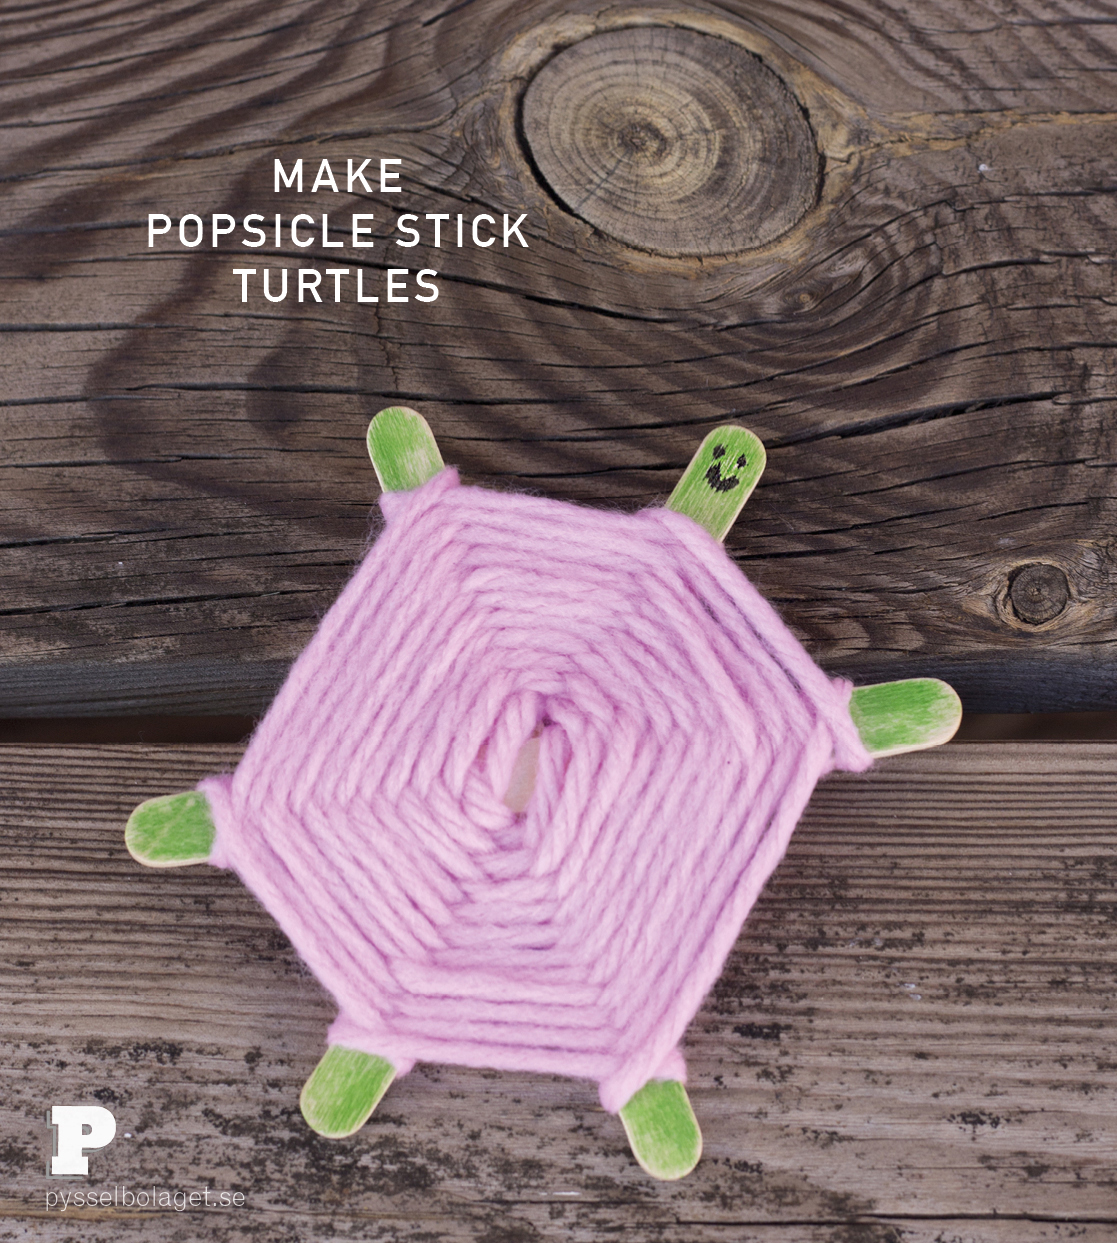 Popsicle stick turtles by Pysselbolaget